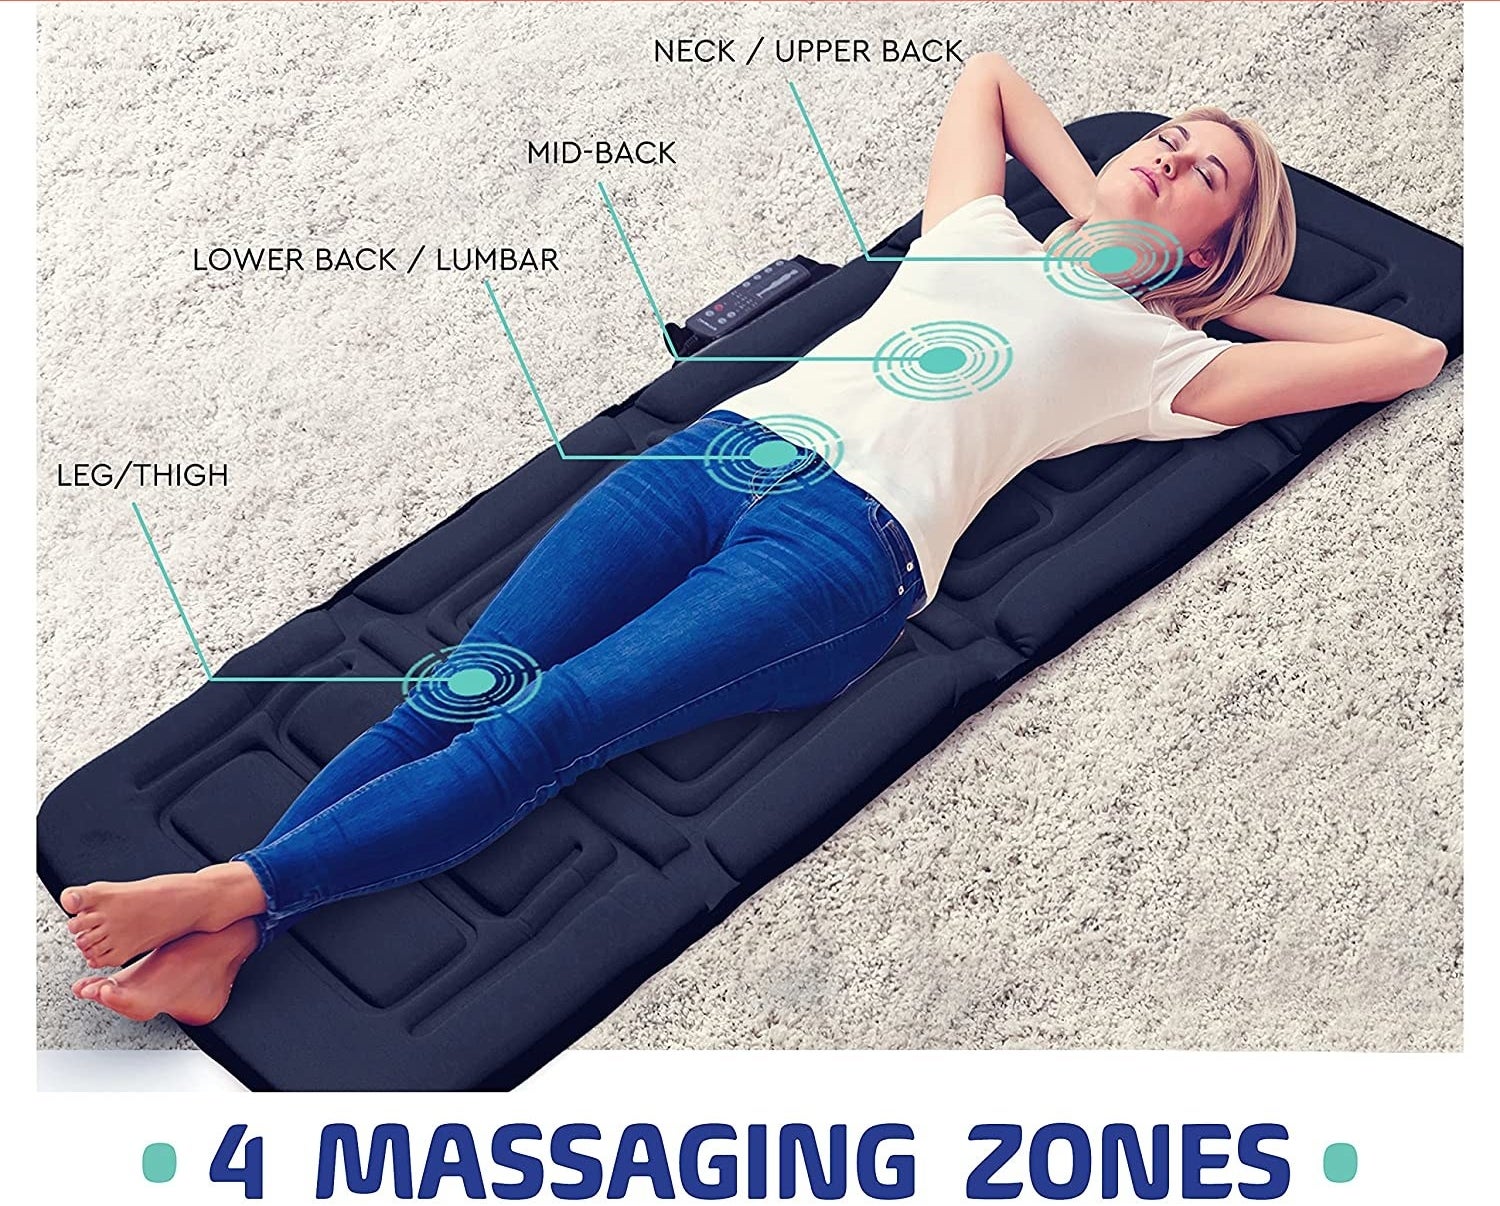 A model lying down on the mat with points showing where the vibrations happen